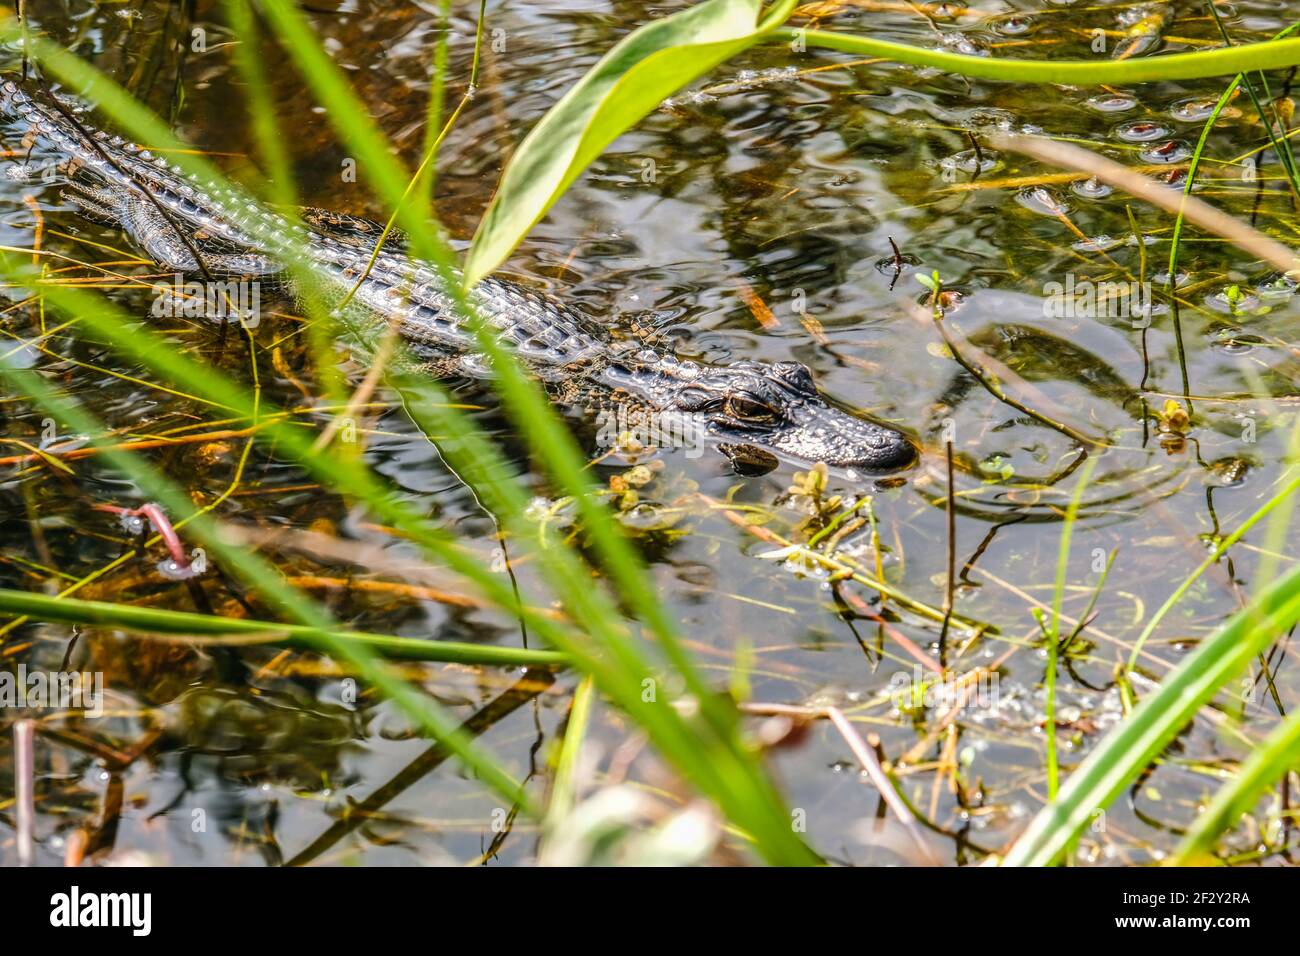 A small young crocodile resting in water Stock Photo